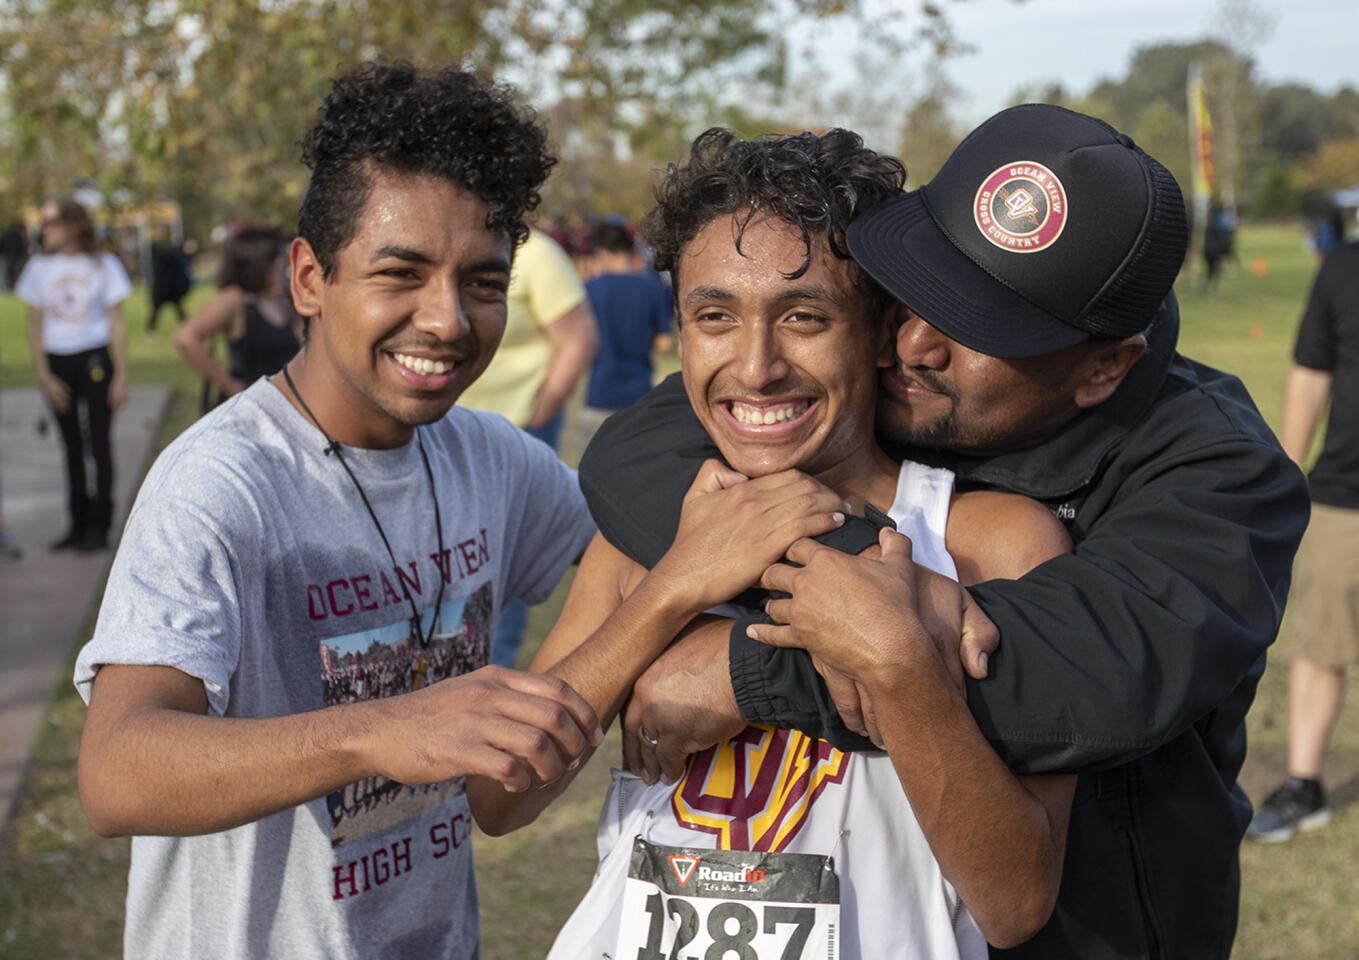 Photo Gallery: Golden West League cross-country finals